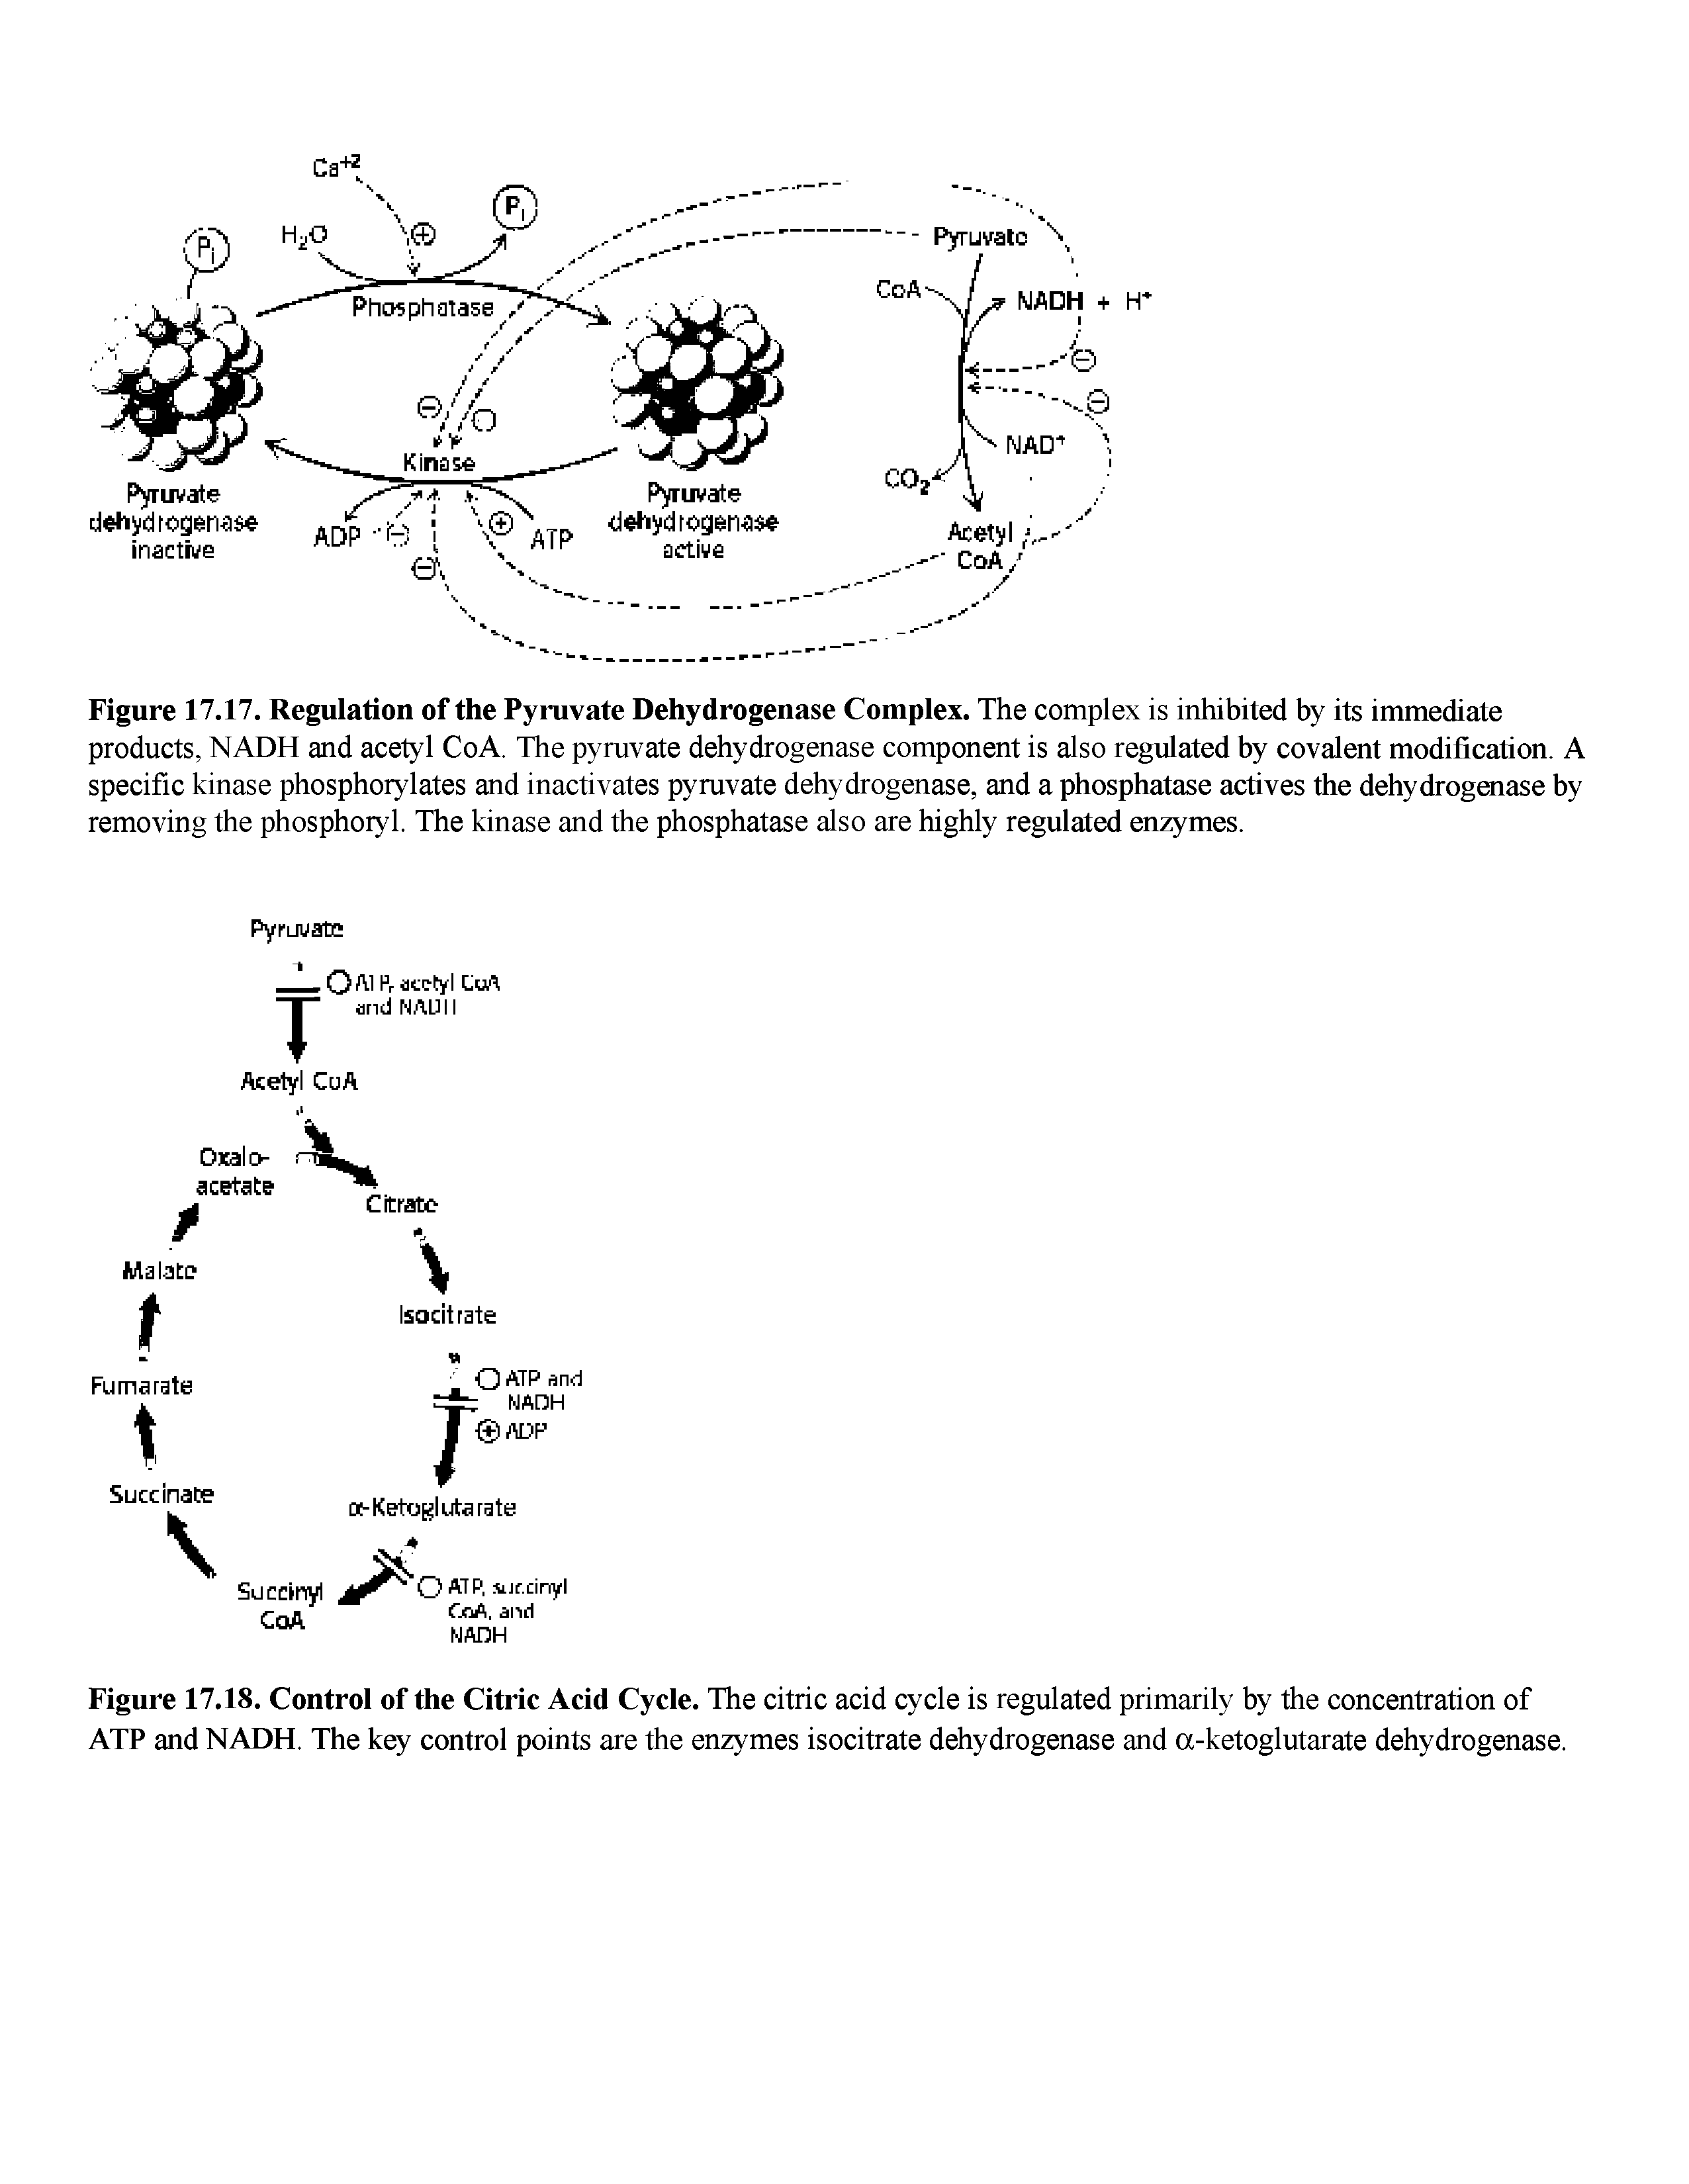 Figure 17.17. Regulation of the Pyruvate Dehydrogenase Complex. The complex is inhibited by its immediate products, NADH and acetyl CoA. The pyruvate dehydrogenase component is also regulated by covalent modification. A specific kinase phosphorylates and inactivates pyruvate dehydrogenase, and a phosphatase actives the dehydrogenase by removing the phosphoryl. The kinase and the phosphatase also are highly regulated enzymes.